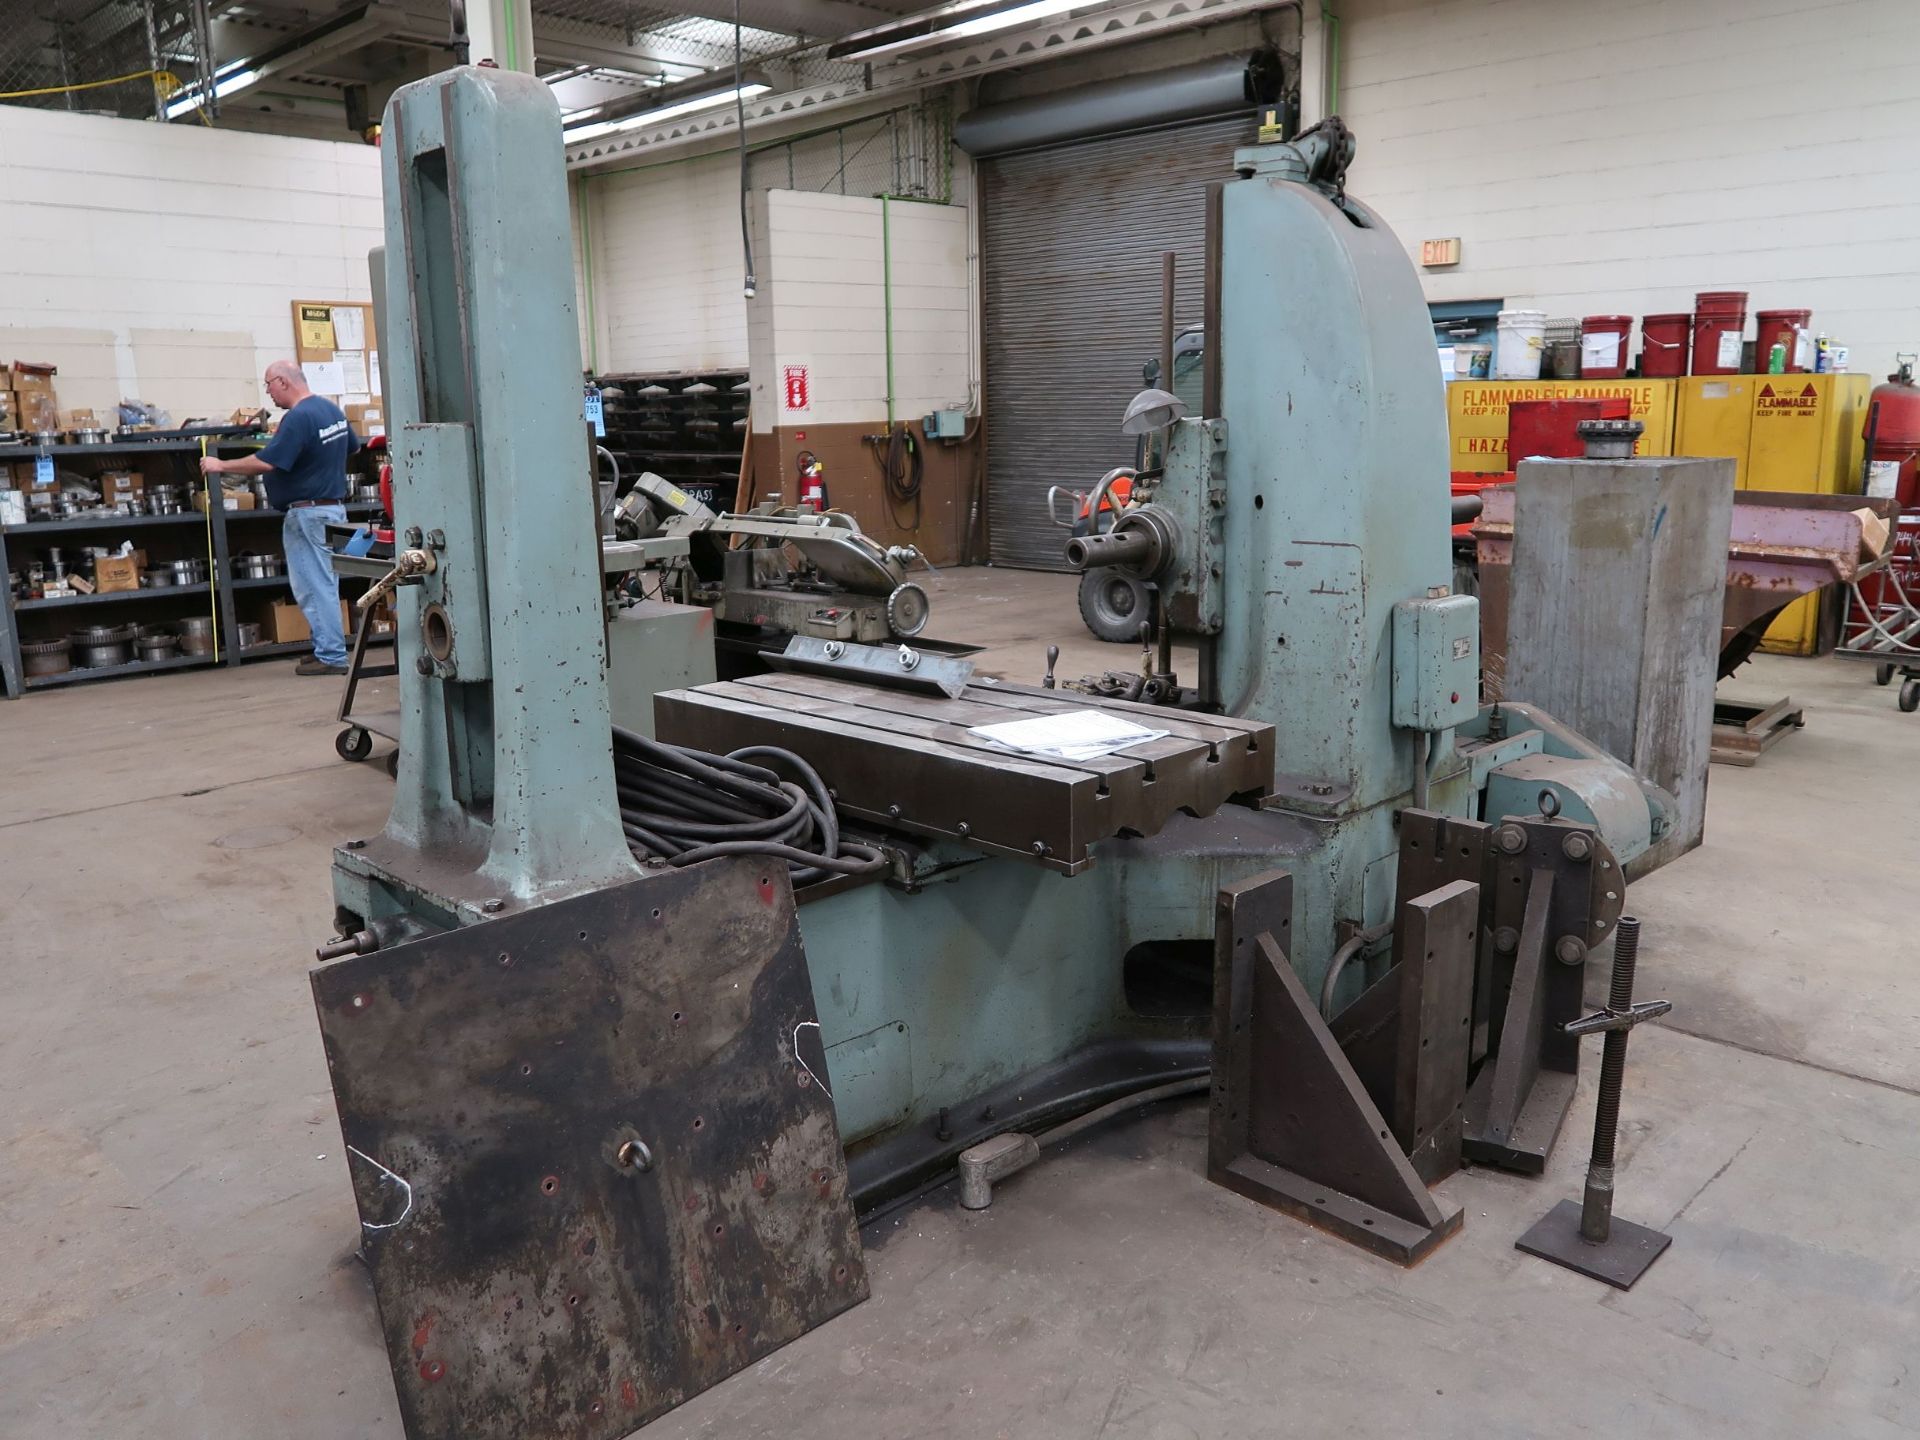 3" LUCAS NO. 31 HORIZONTAL BORING MILL, SPINDLE SPEED 15-200 RPM, 24" X 48" T-SLOTTED TABLE - Image 3 of 11